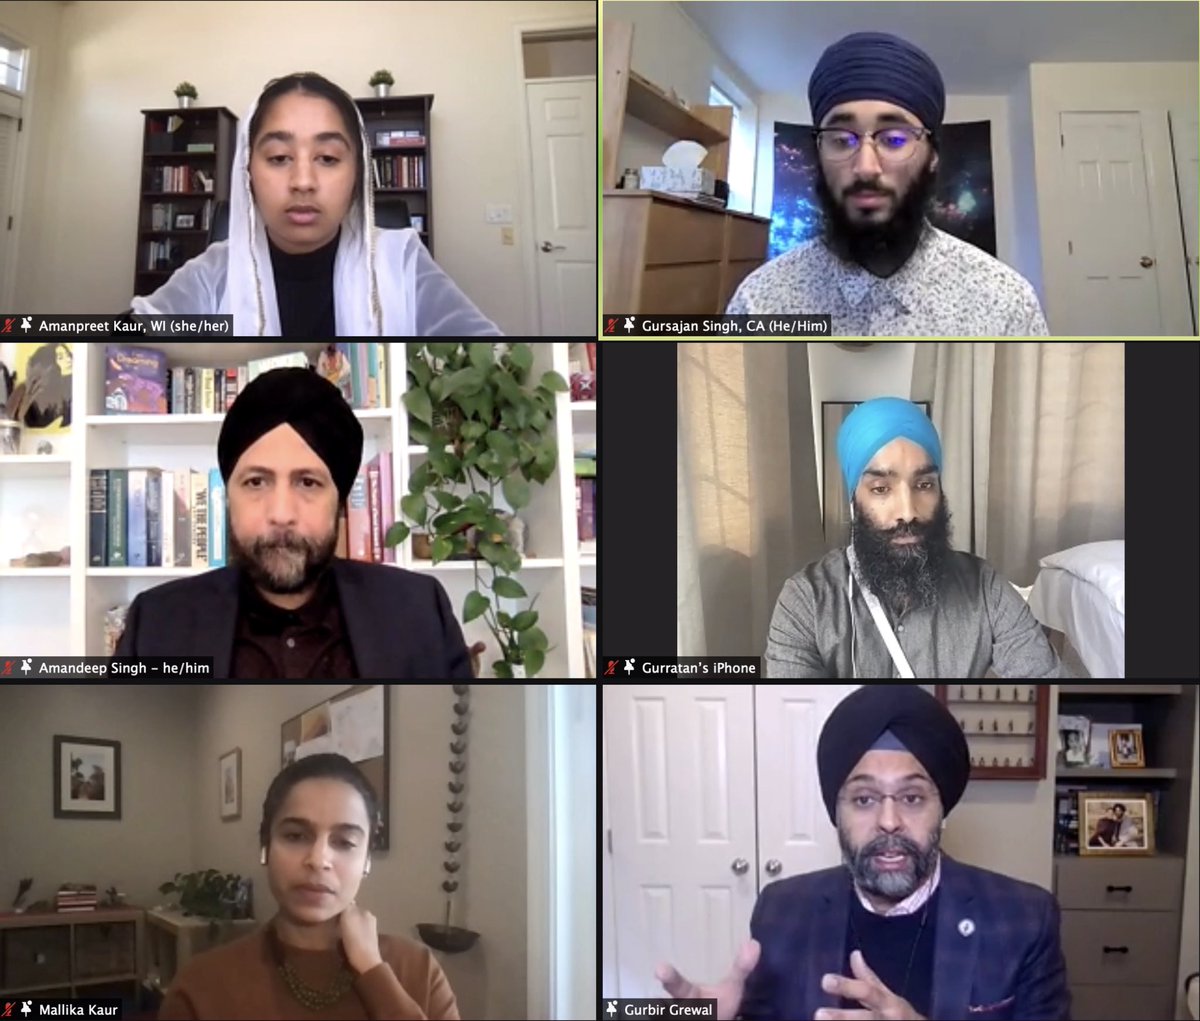 Great discussion with @SikhTeens from around the globe during today's Sikh Footprint panel. My fellow panelists & I are living proof that you don't have to sacrifice who you are to achieve success. I'm honored to help young Sikhs embrace their identity in the professional world.